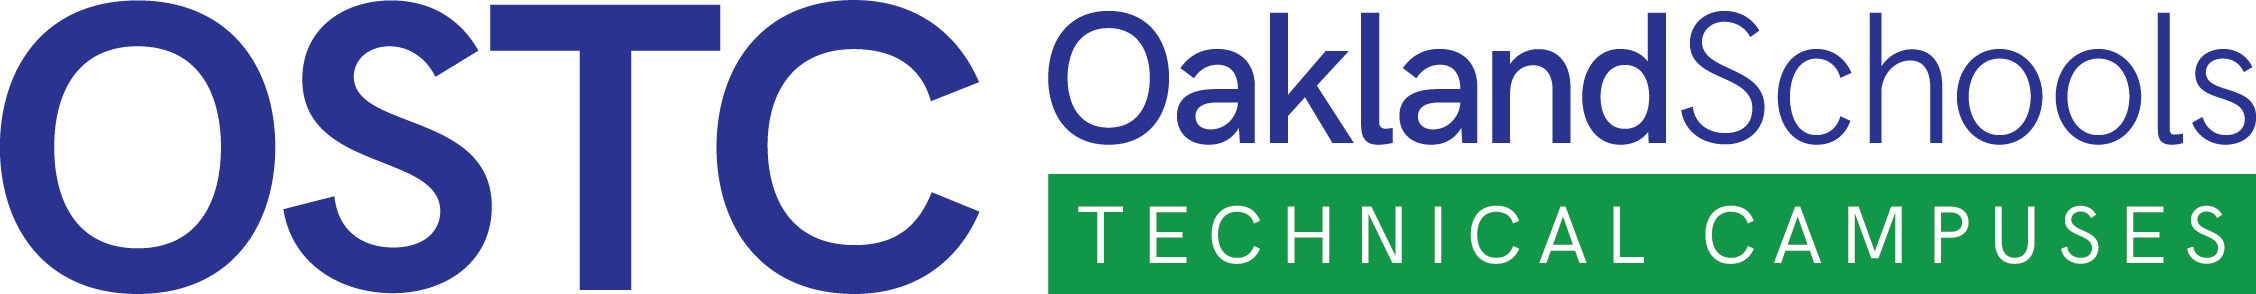 Oakland Schools Technical Campuses